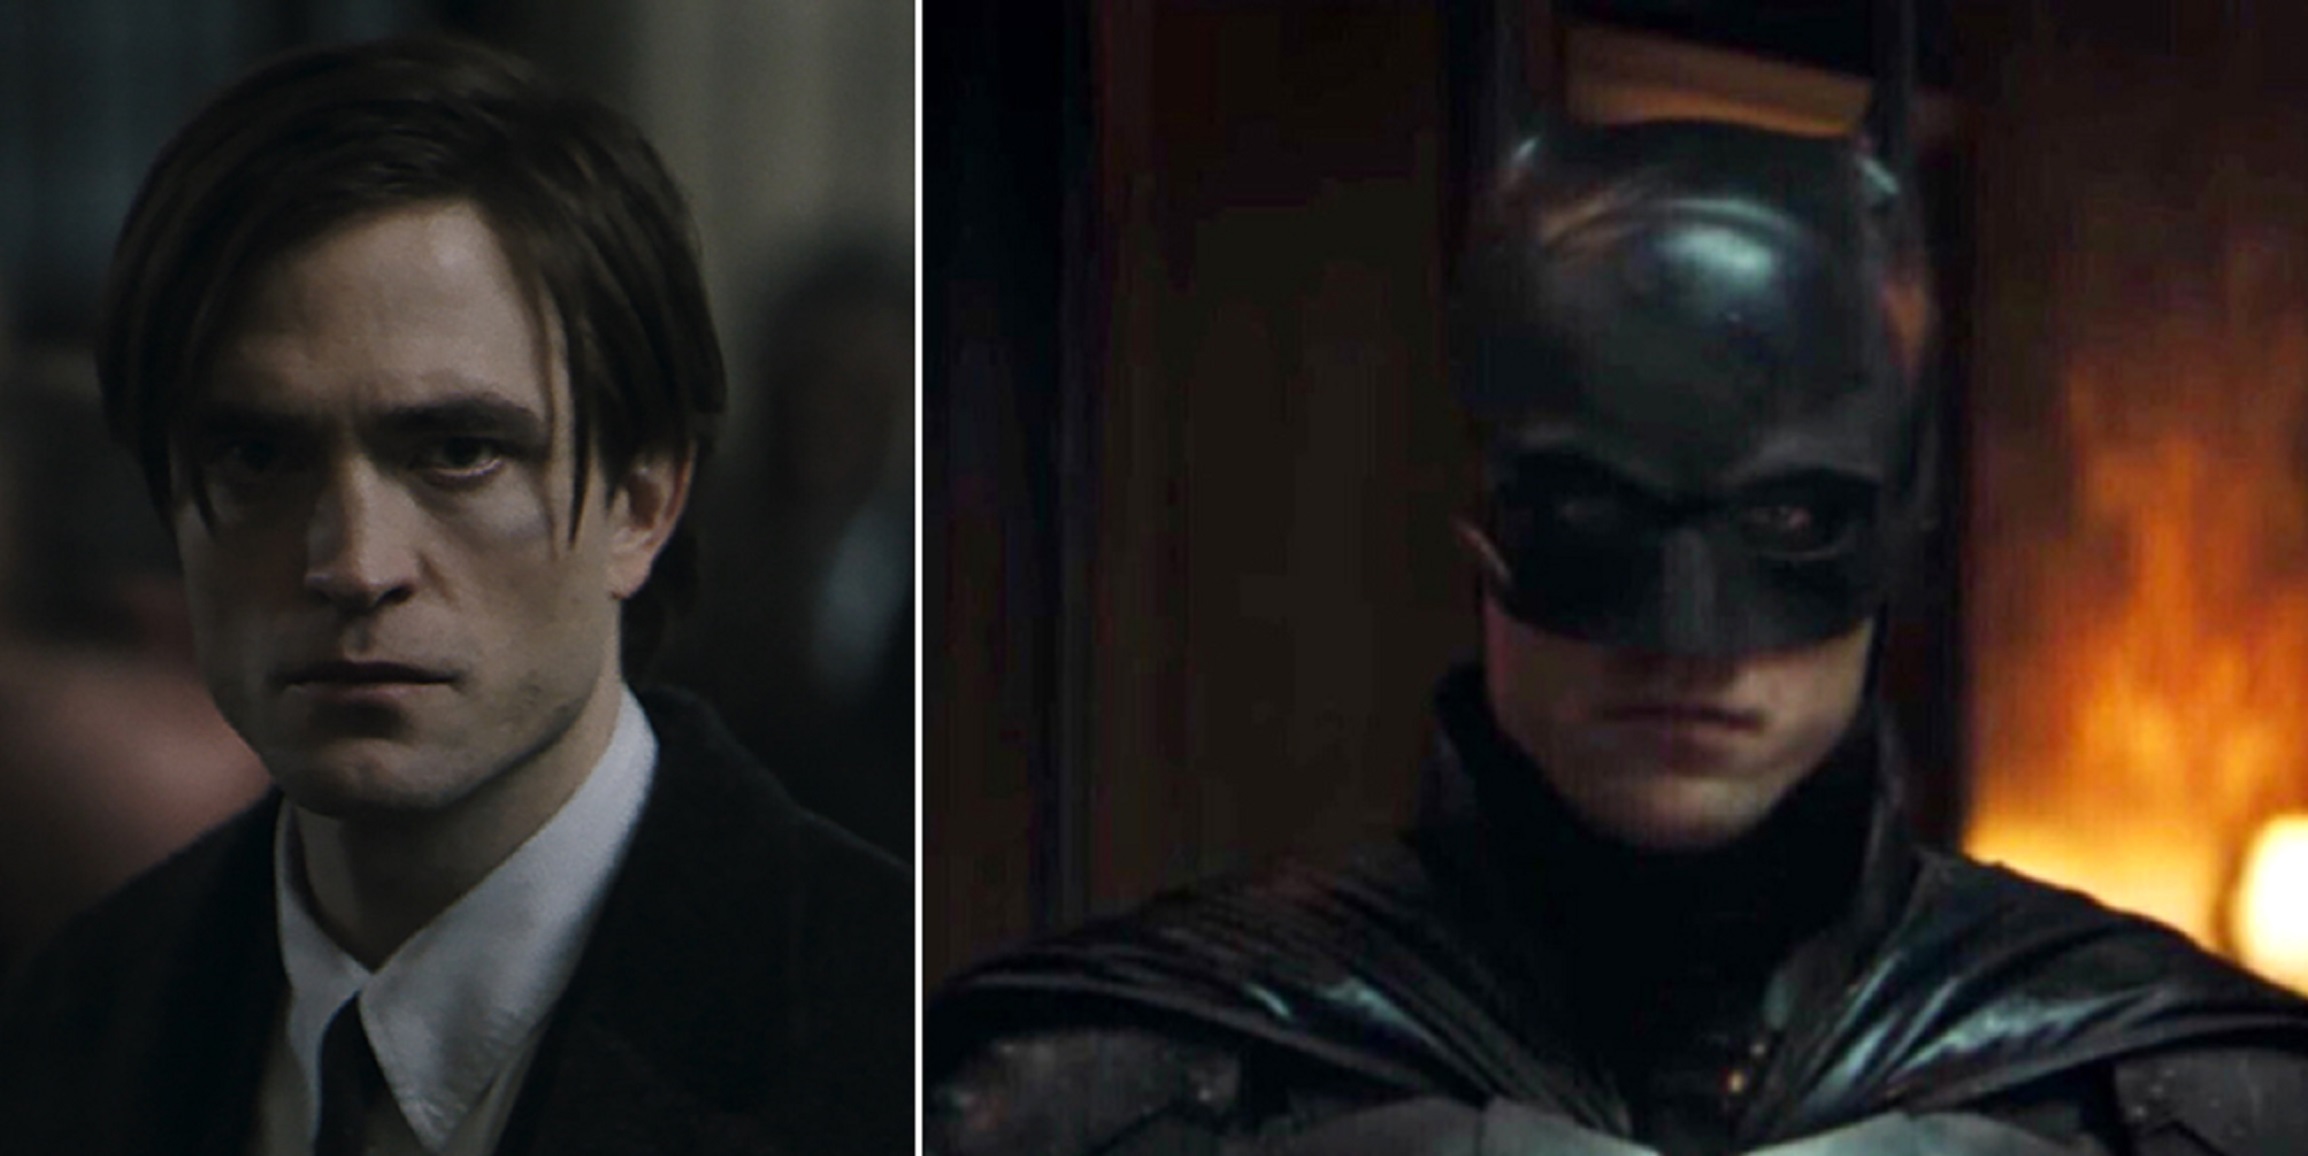 Is Robert Pattinson's First Look From New Batman Movie a Hit Or a Miss?  Vote Here!